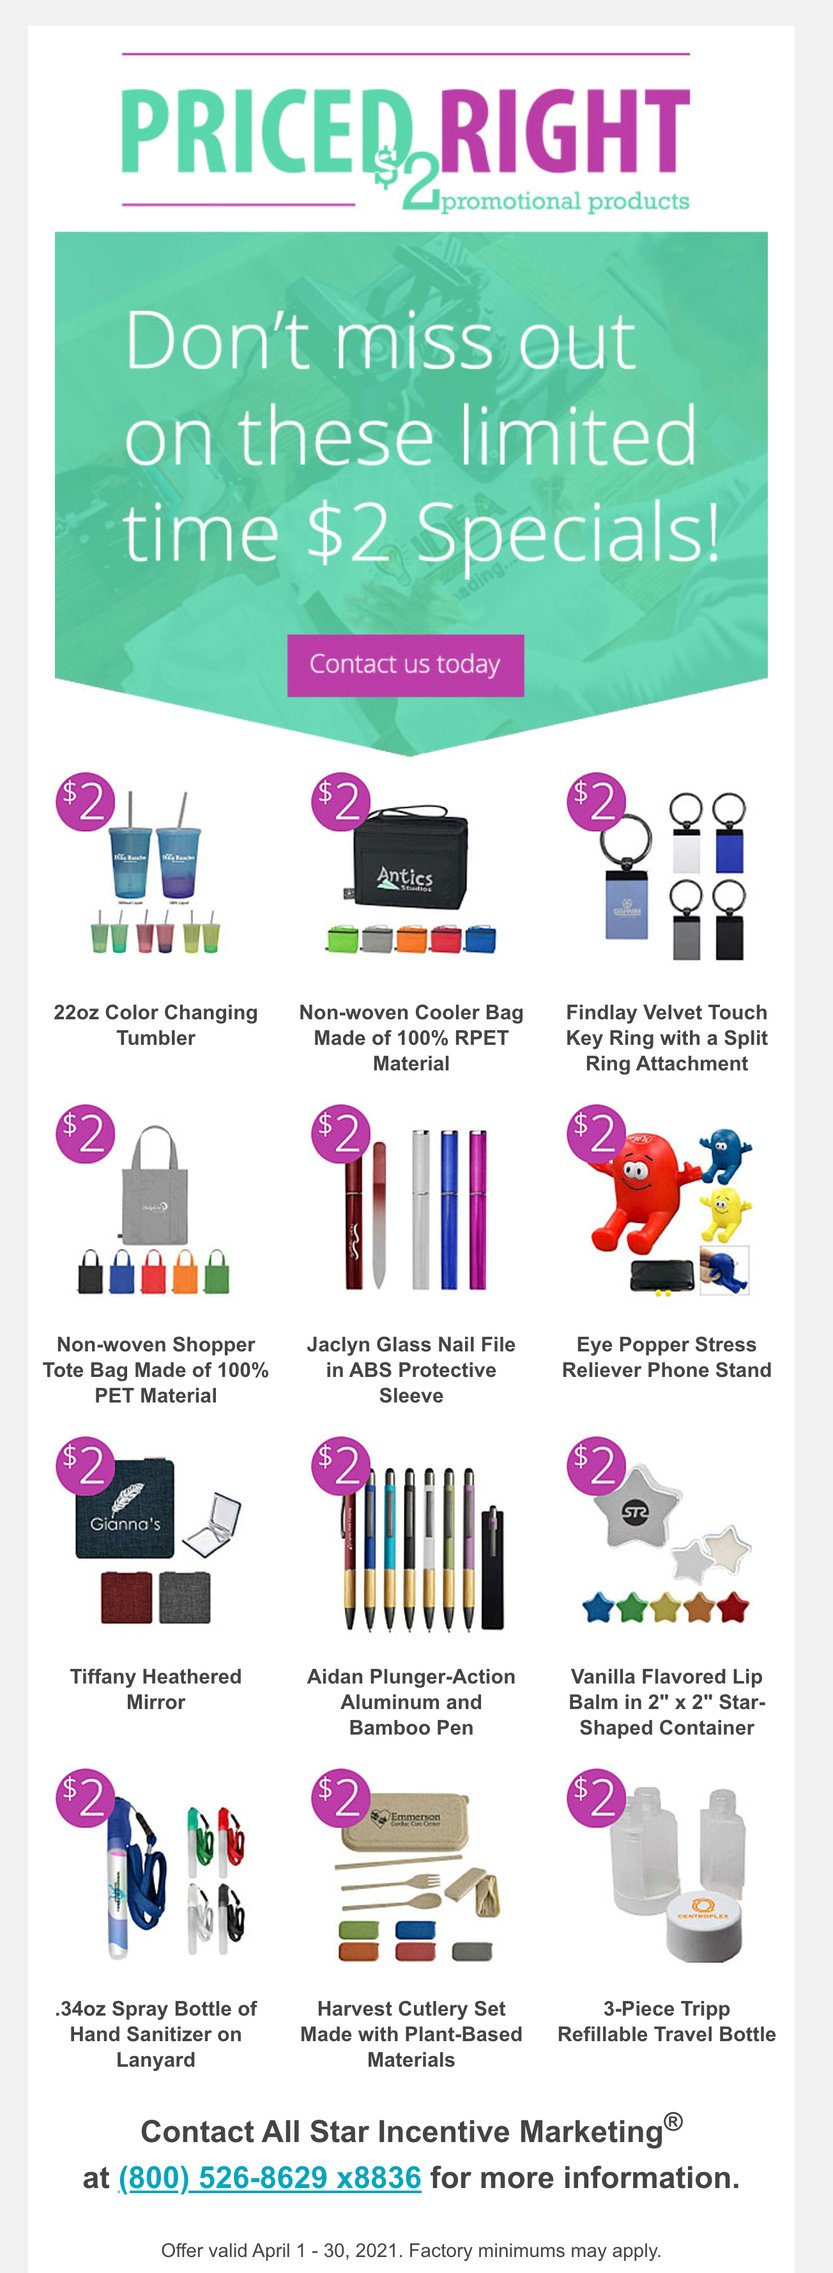 Priced Right April 2021 $2 Promotional Products